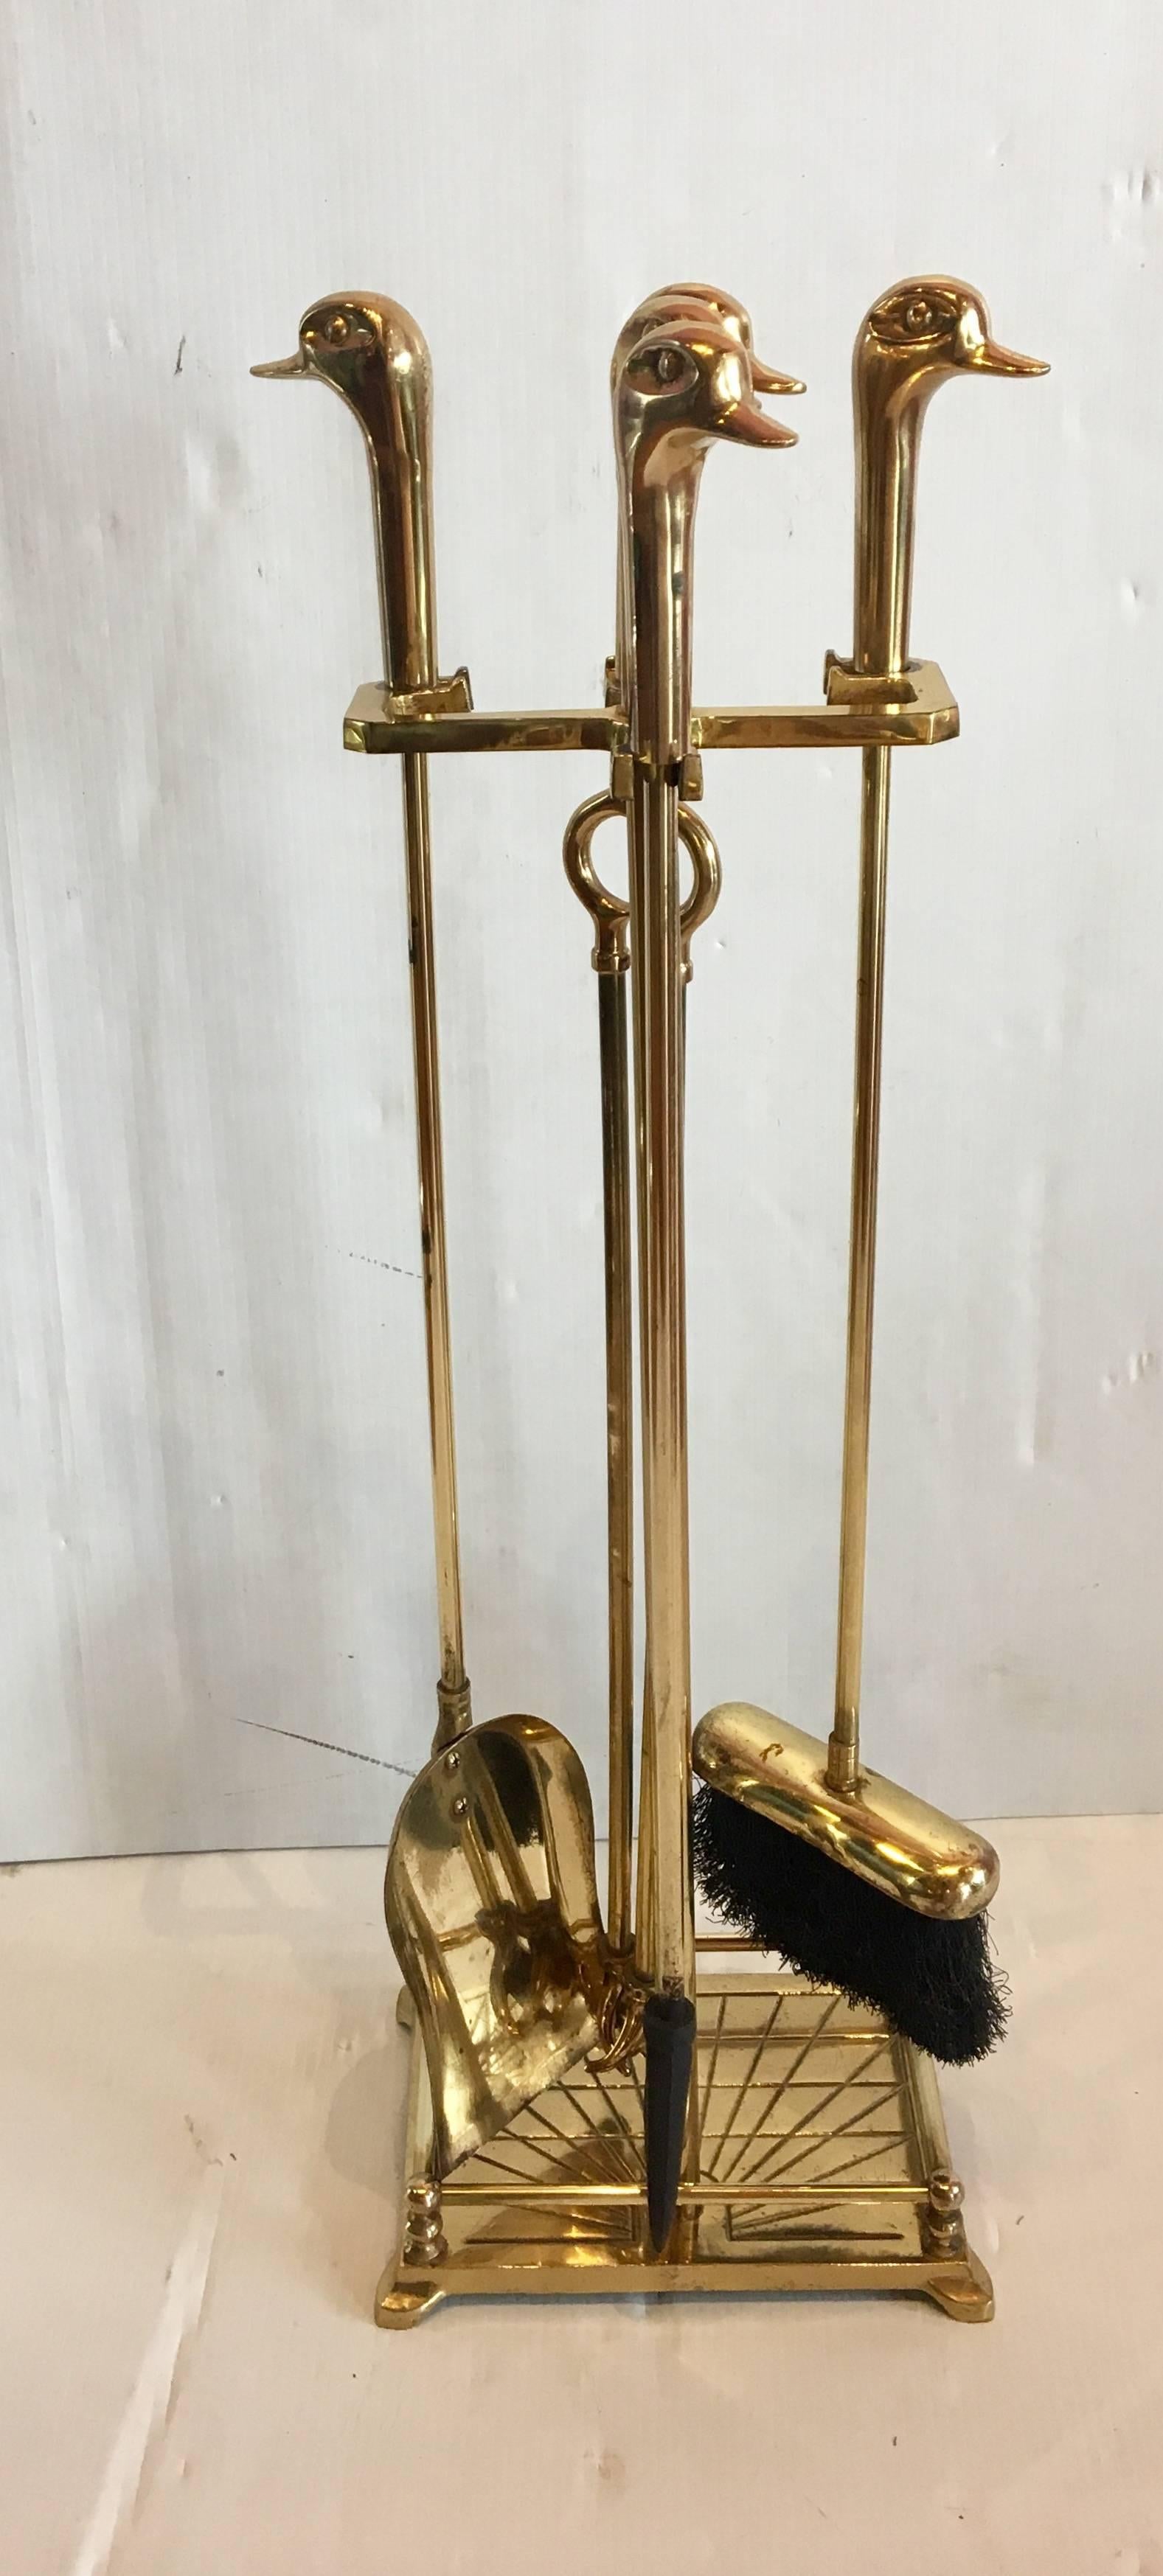 Elegant polished Italian solid brass fireplace tools set. With ducks heads handles.